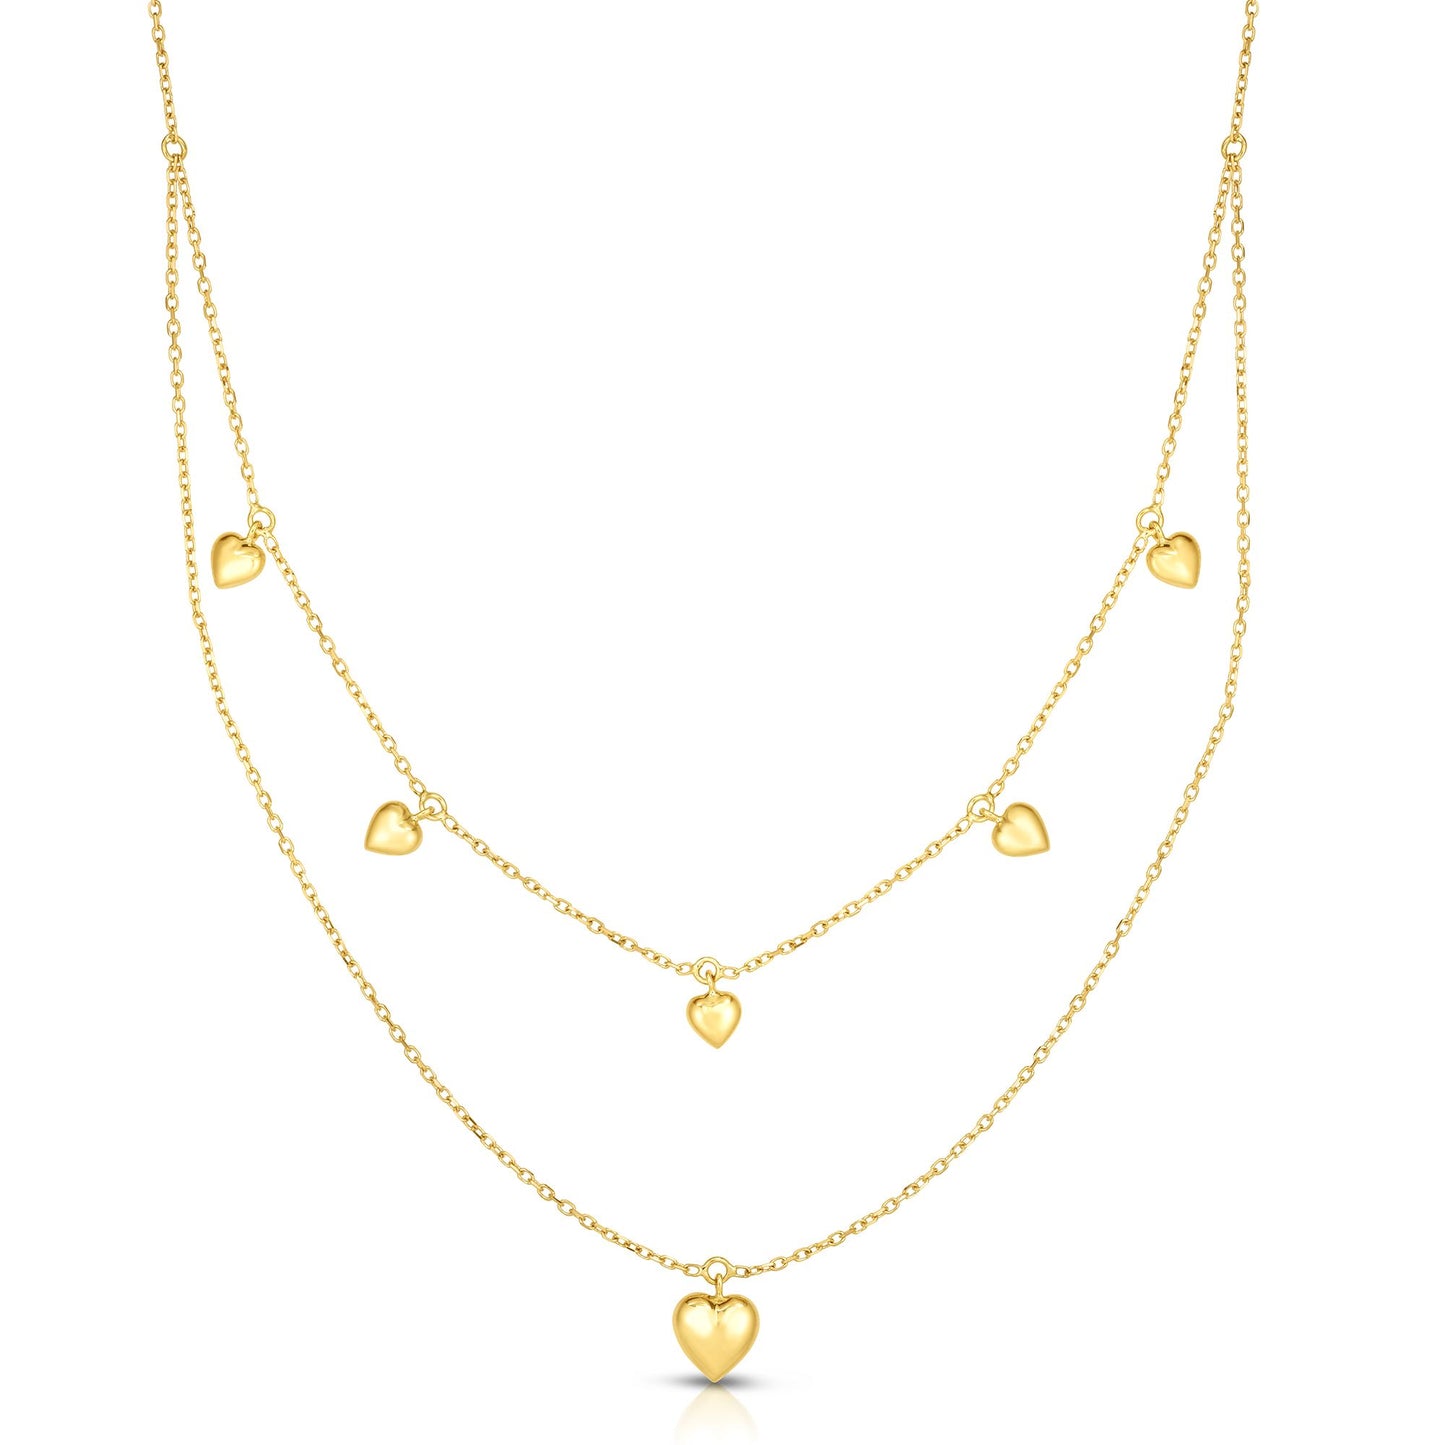 14K Gold Polished Puffed Heart Multi-Strand Necklace